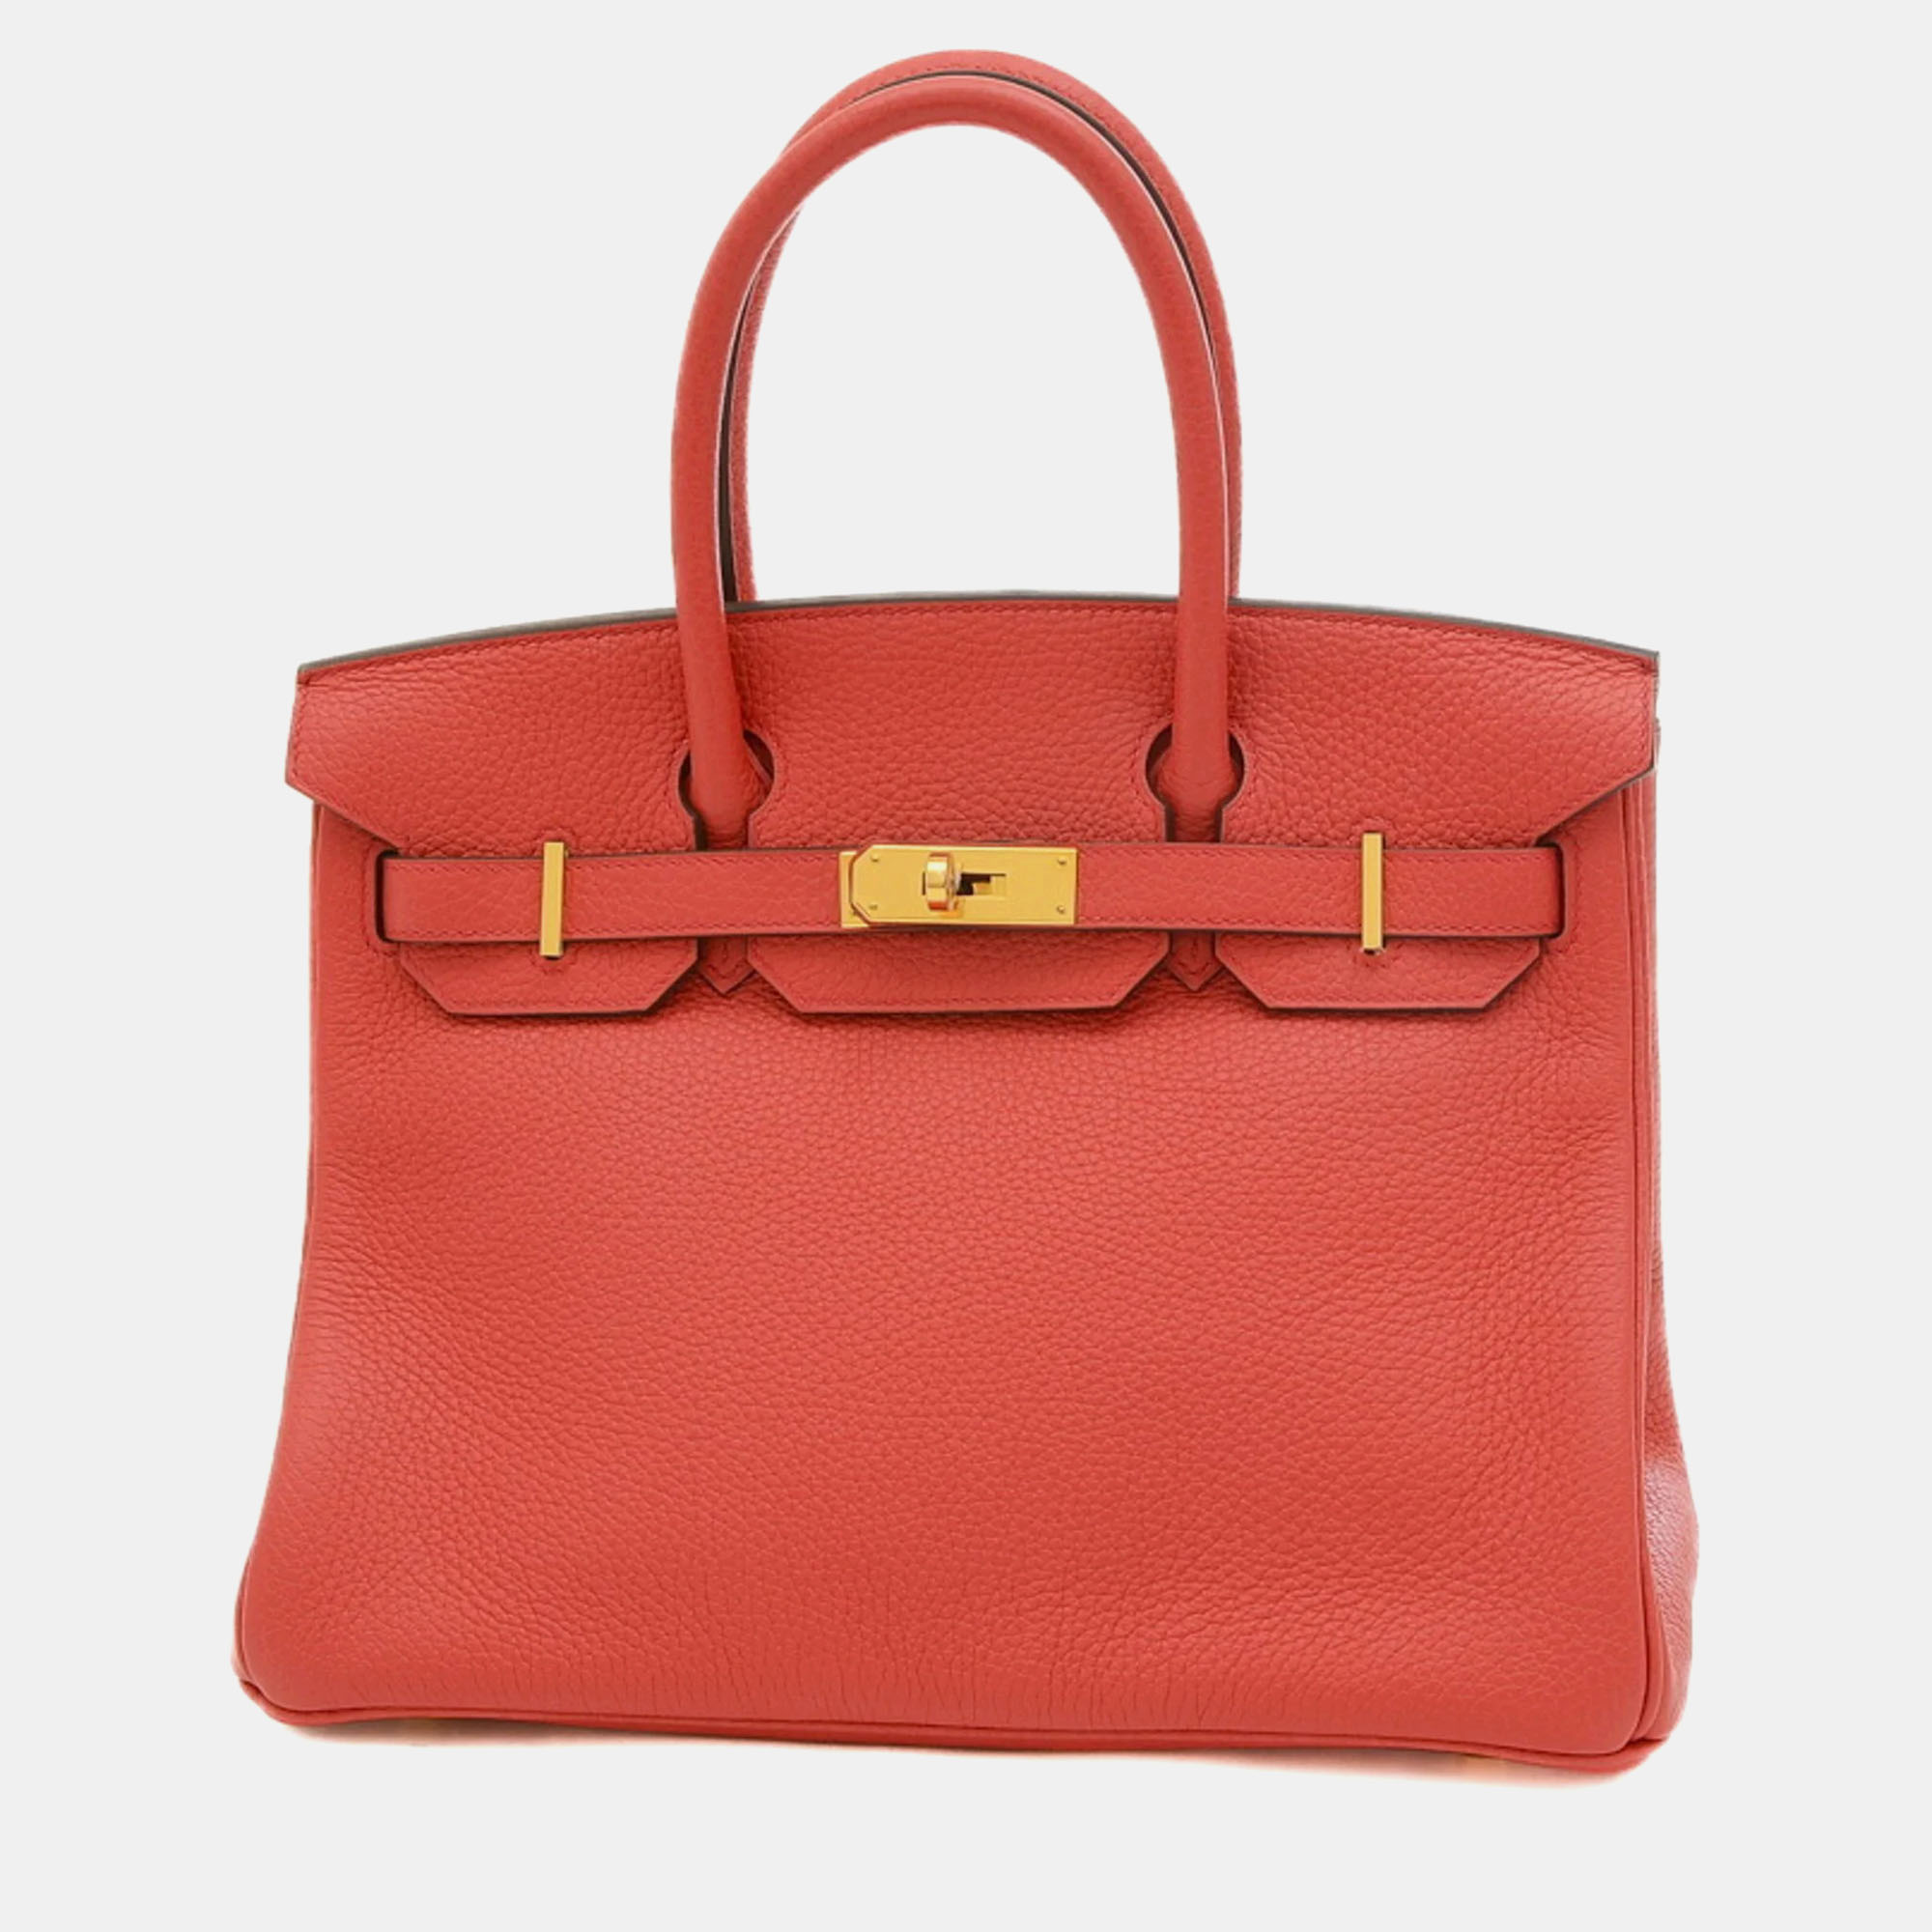 Pre-owned Hermes Birkin 30 Handbag Taurillon Clemence Bougainvillea D Stamp In Red